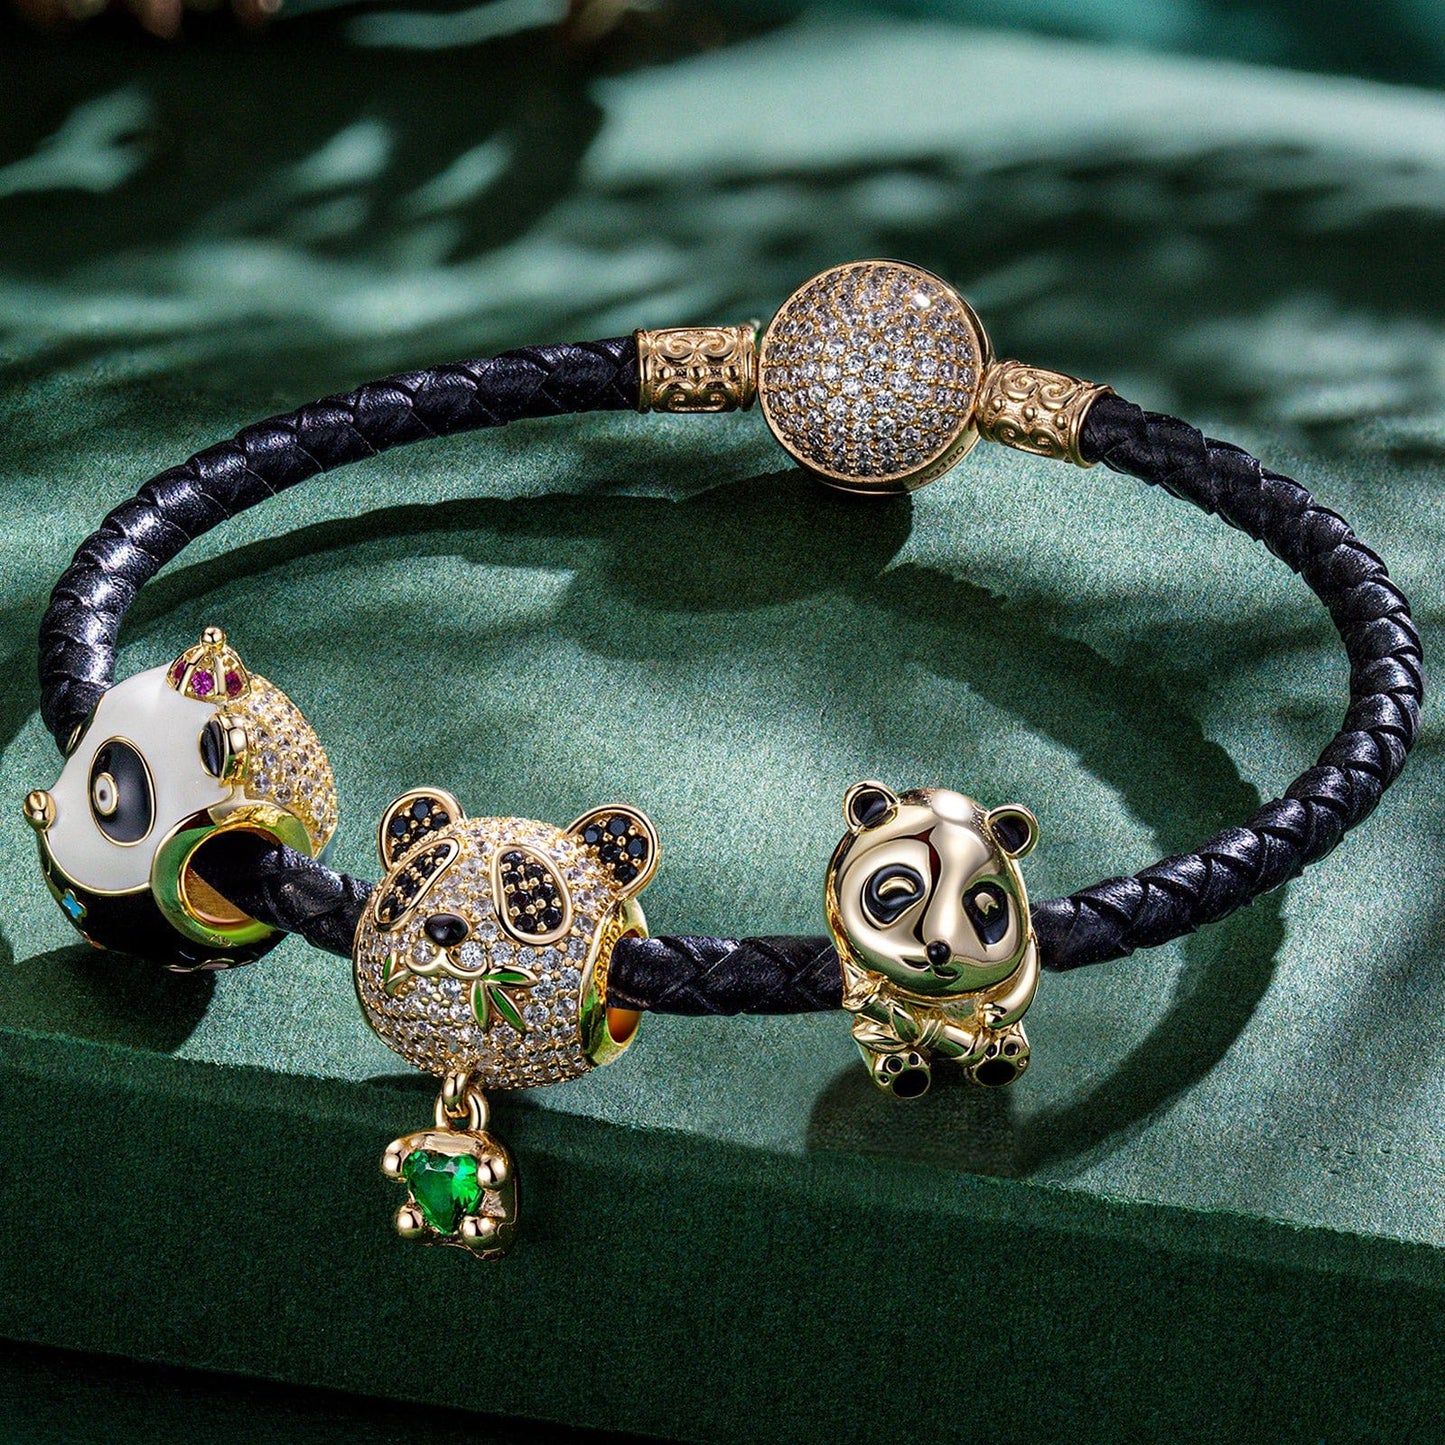 Lovely Panda Tarnish-resistant Silver Animals Charms Bracelet Set With Enamel In 14K Gold Plated - Heartful Hugs Collection